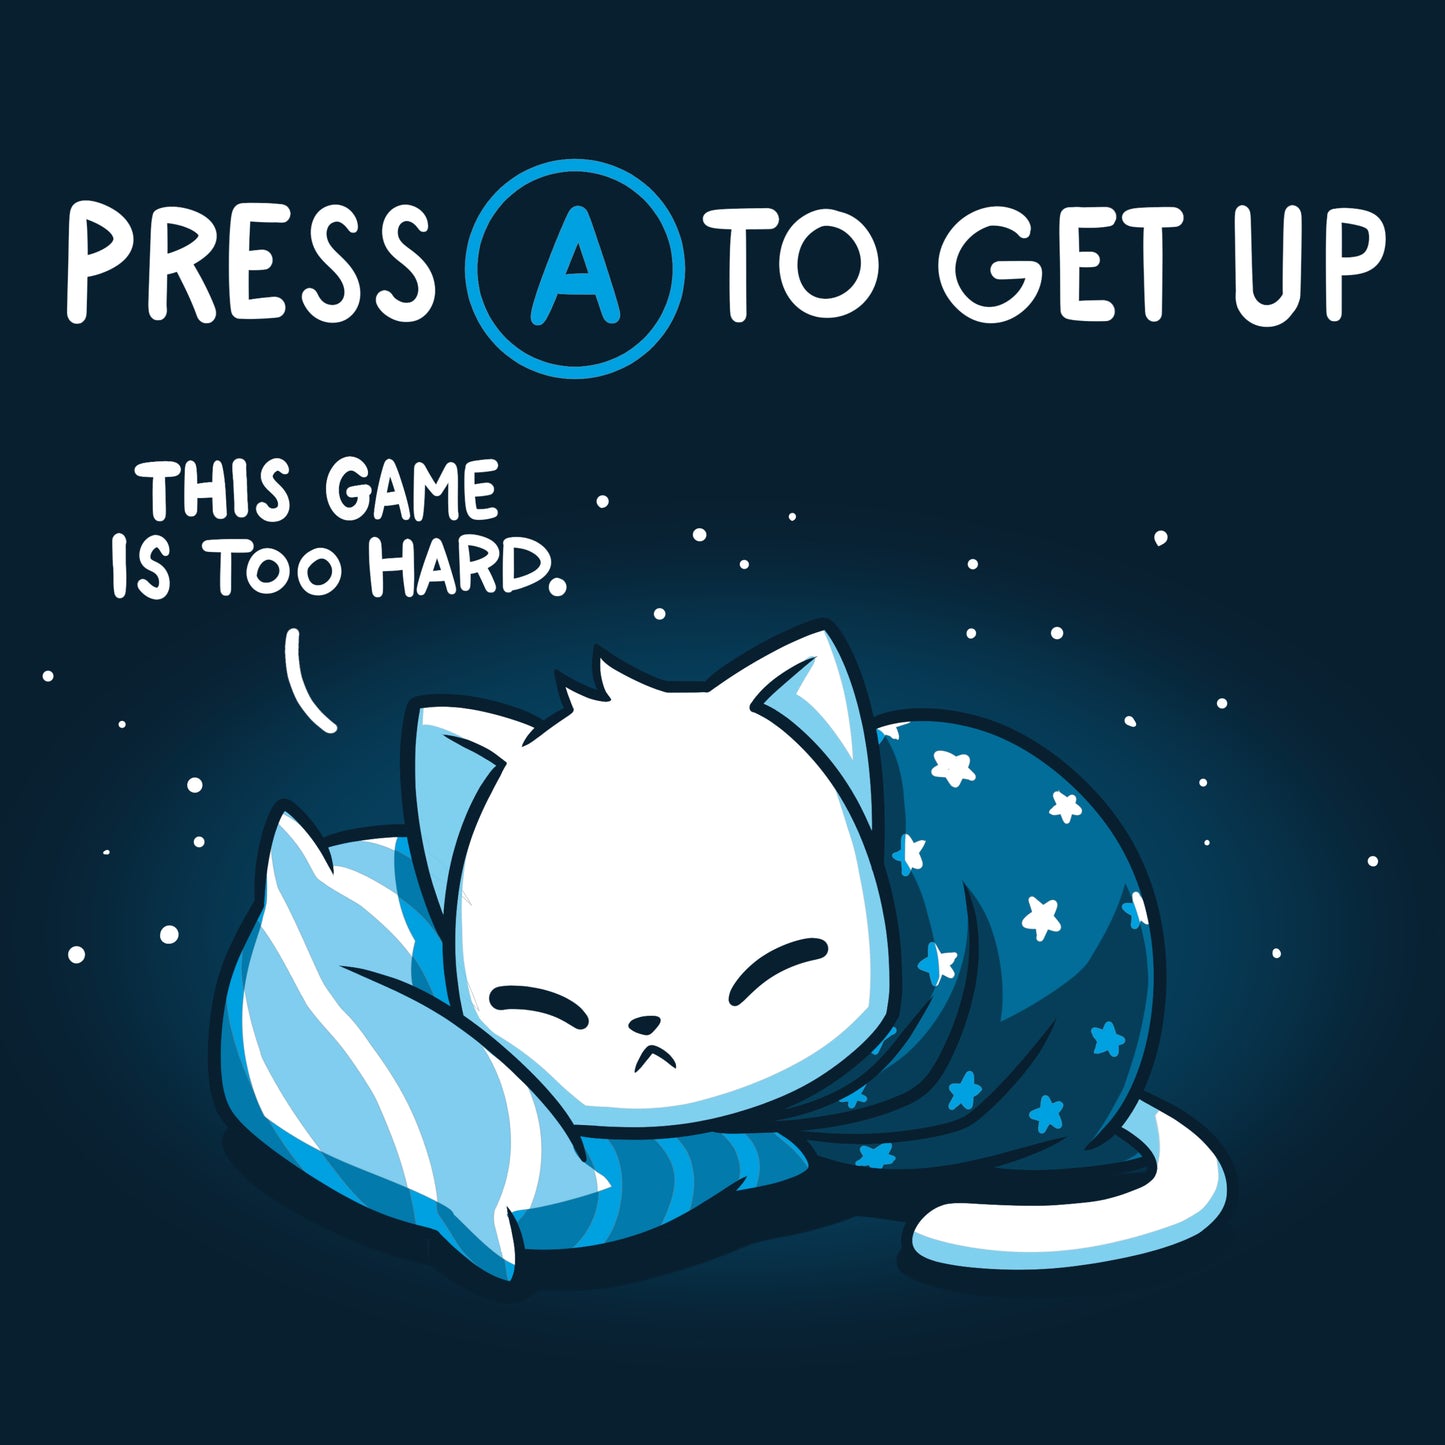 This Bedtime Lag gaming T-shirt adds a touch of lifestyle to the challenging game "Press to get up". (Brand Name: TeeTurtle)